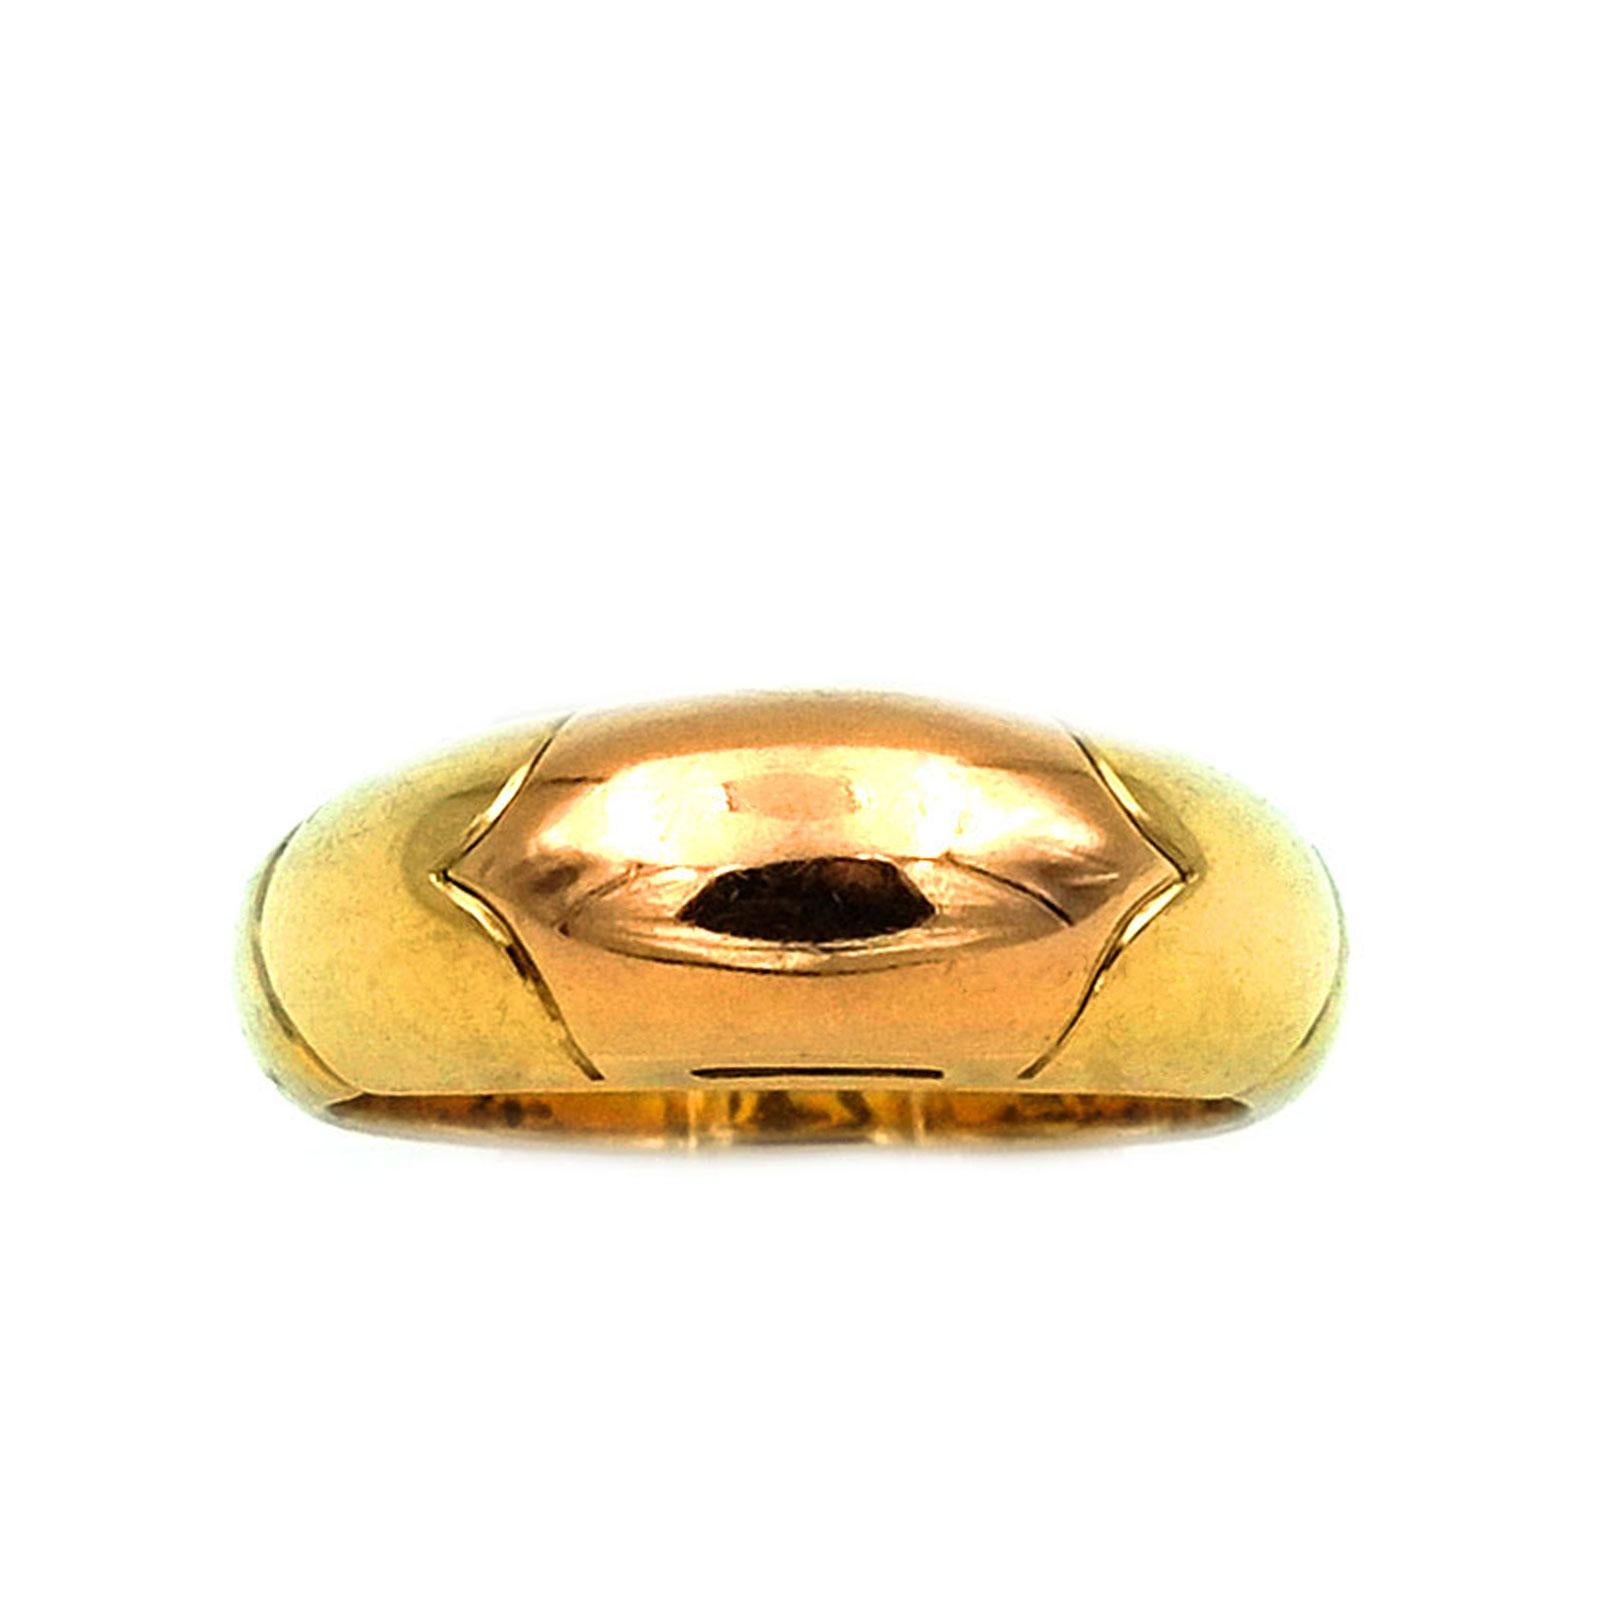 BULGARI 18K Two-Tone Gold Band Ring 

Sporty, elegant estate band ring with a domed ring head handcrafted of 18 K two-tone yellow and rose gold. 
A classy ring in a timeless design from the exclusive maison BVLGARI. This ring comes from a collection